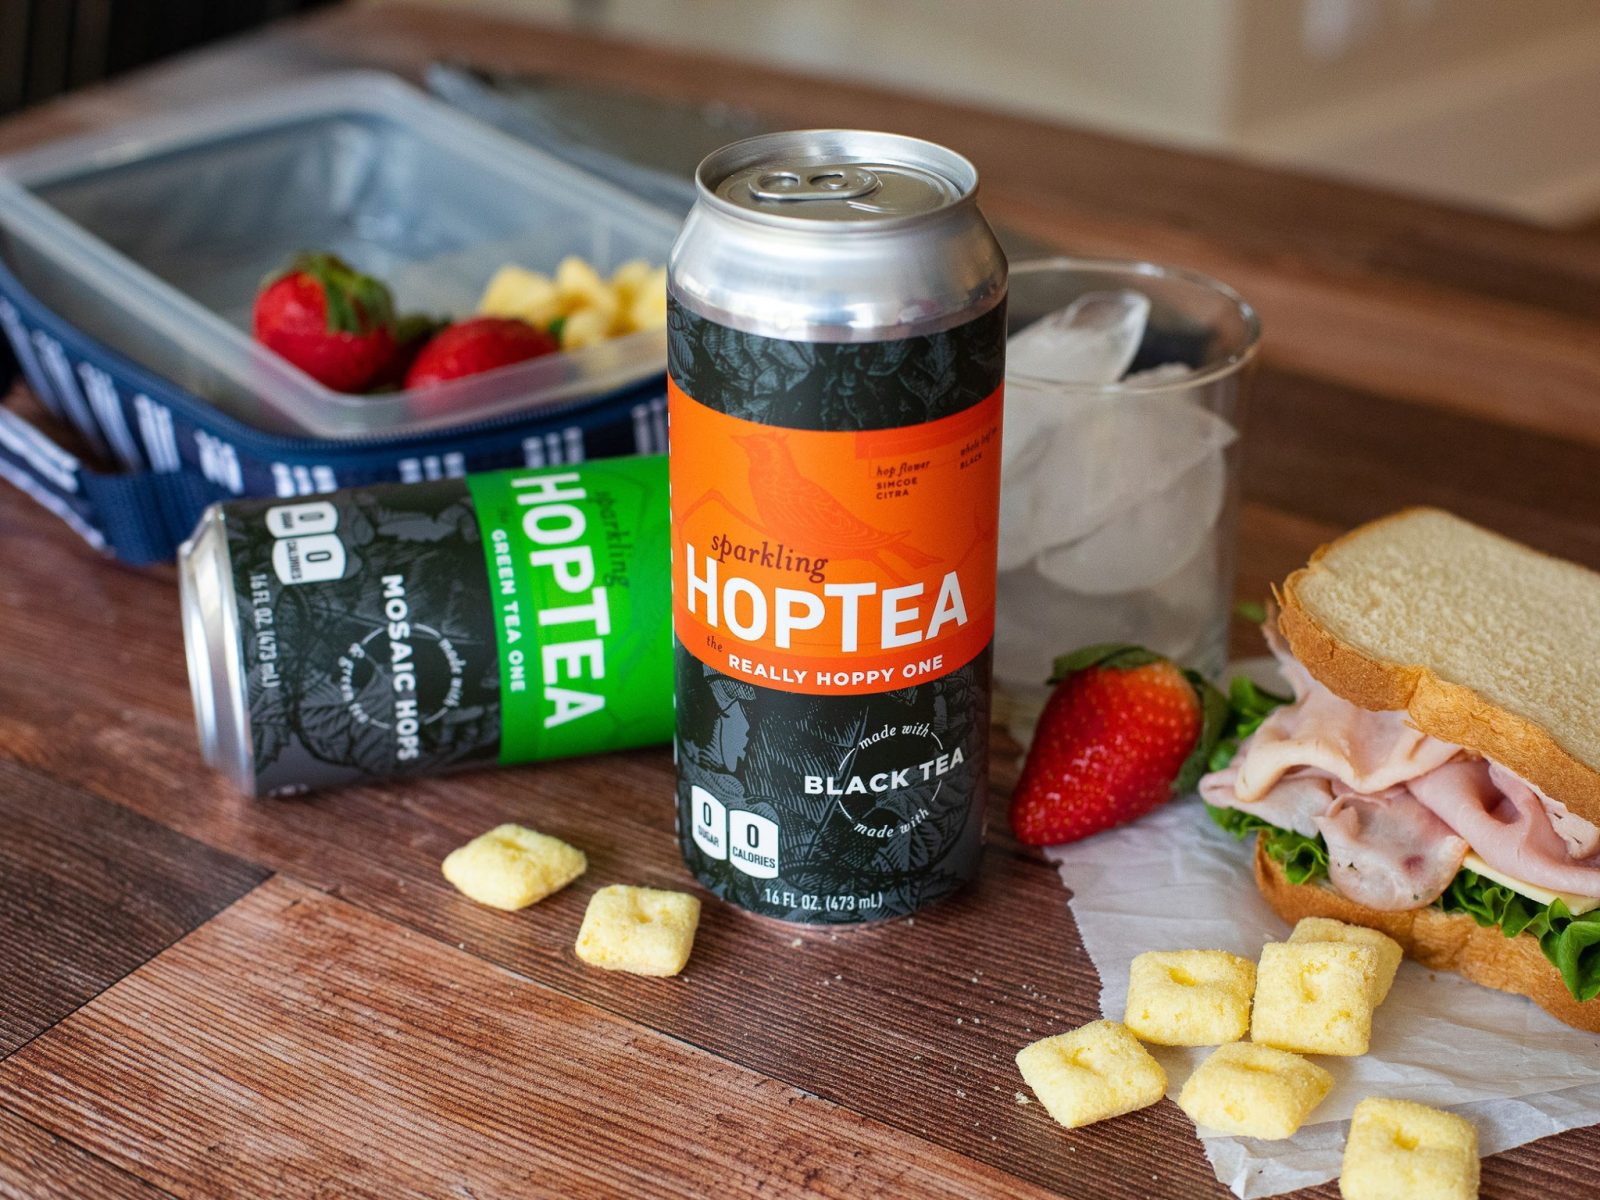 Get A Can Of Sparkling HopTea For Just $1.50 At Publix (Half Price)